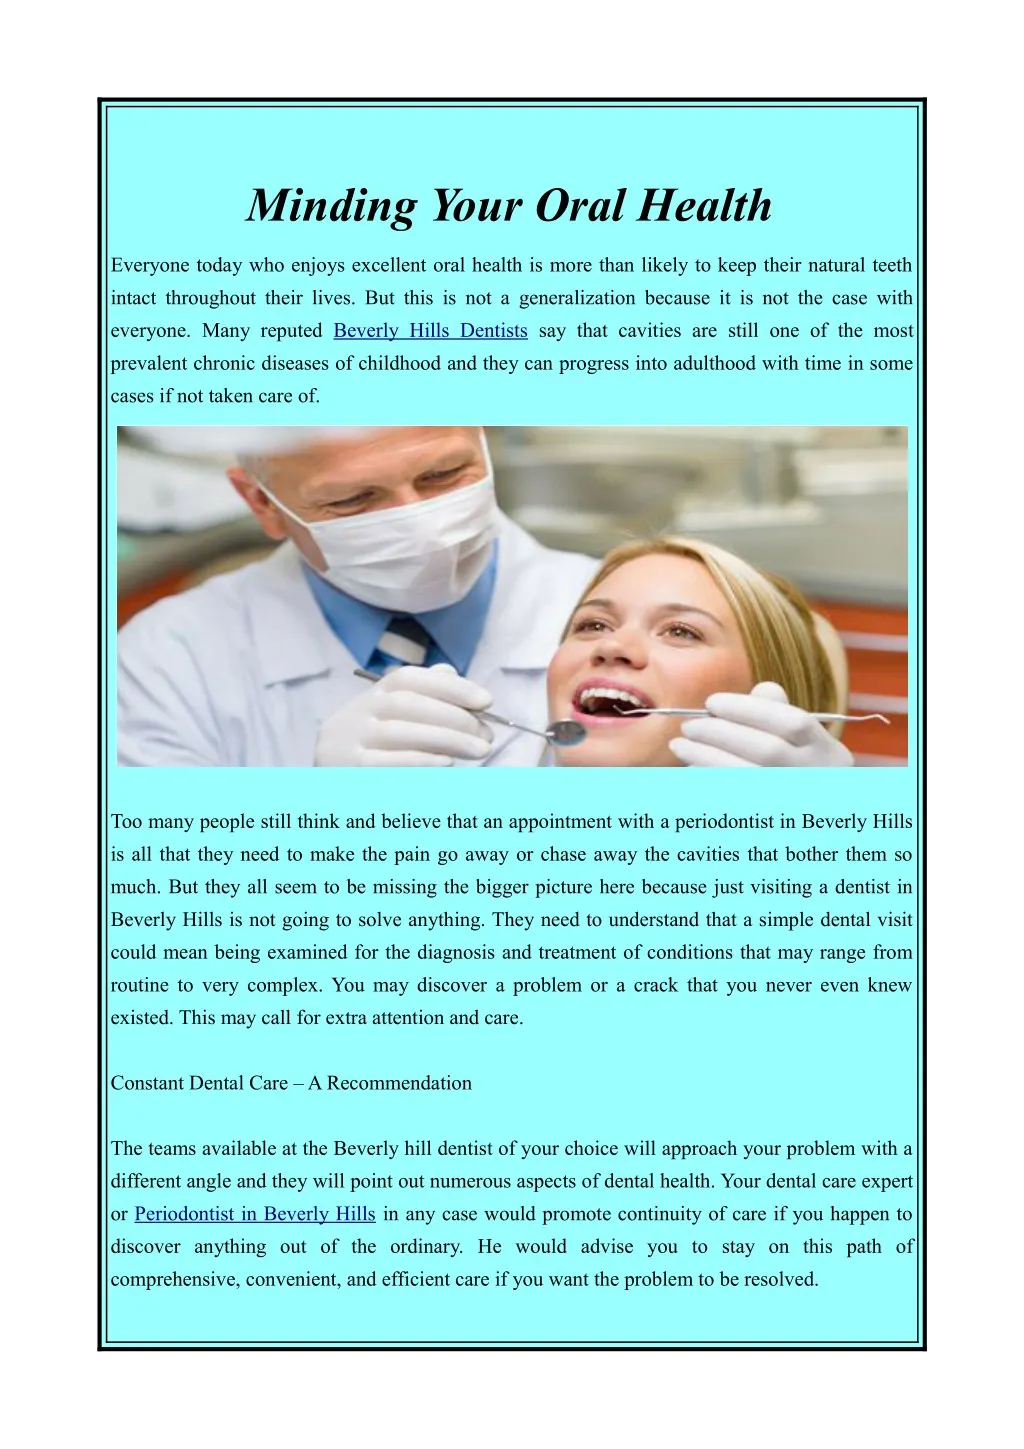 minding your oral health